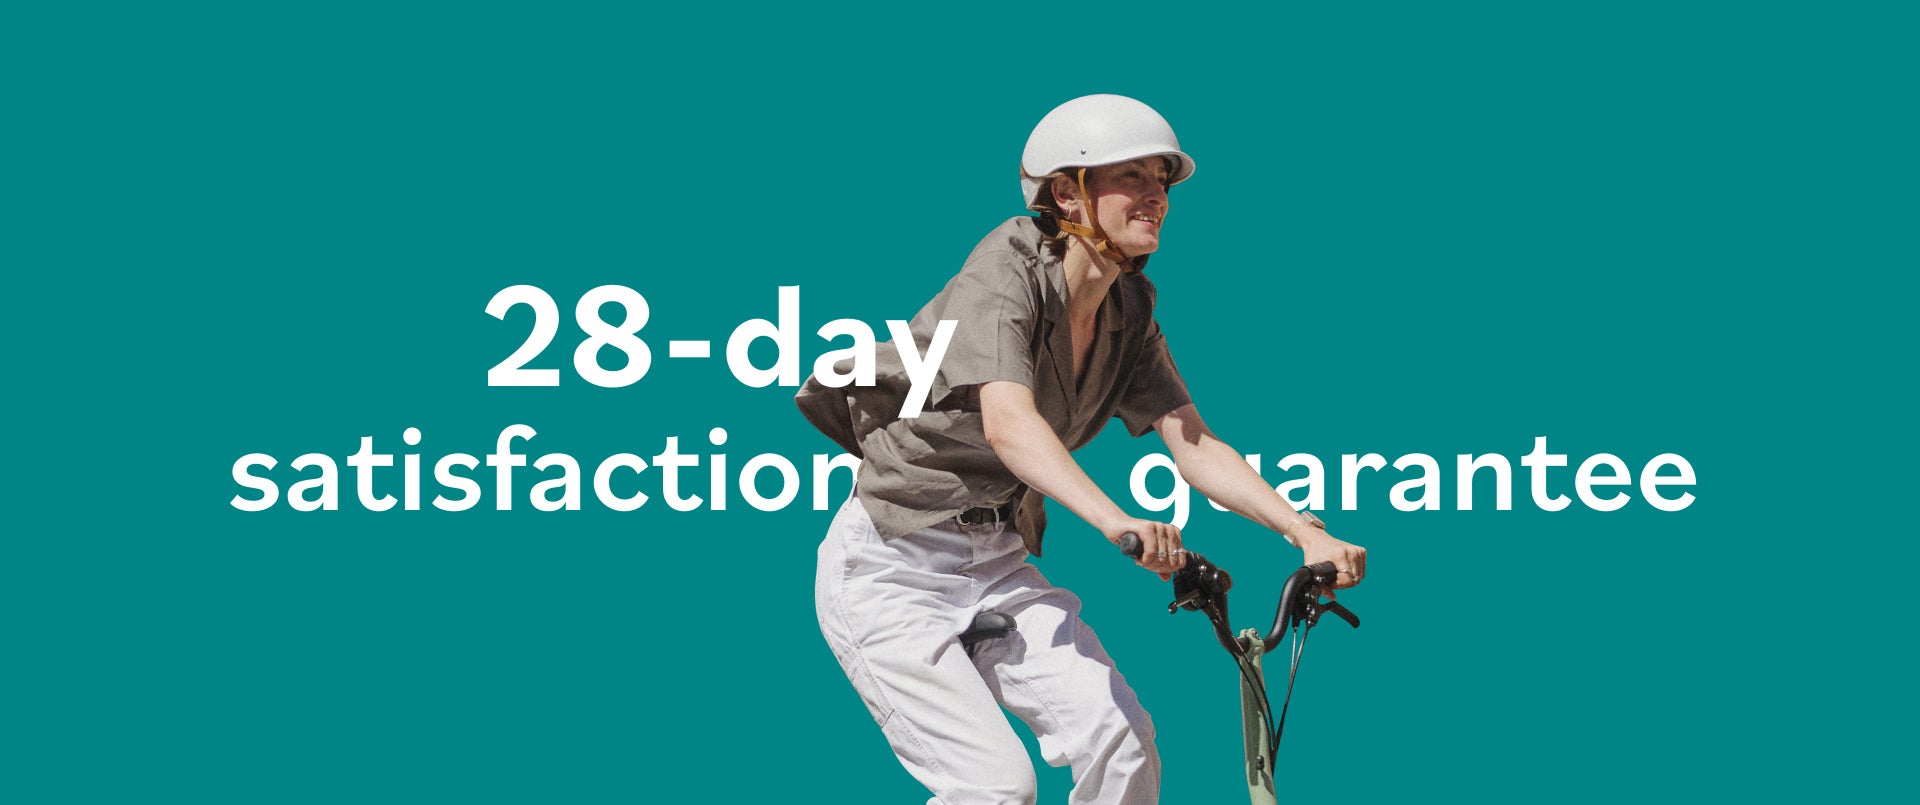 A happy woman riding a Brompton Matcha Green folding bike against a graphic green background with white graphic text "28-day satisfaction guarantee"